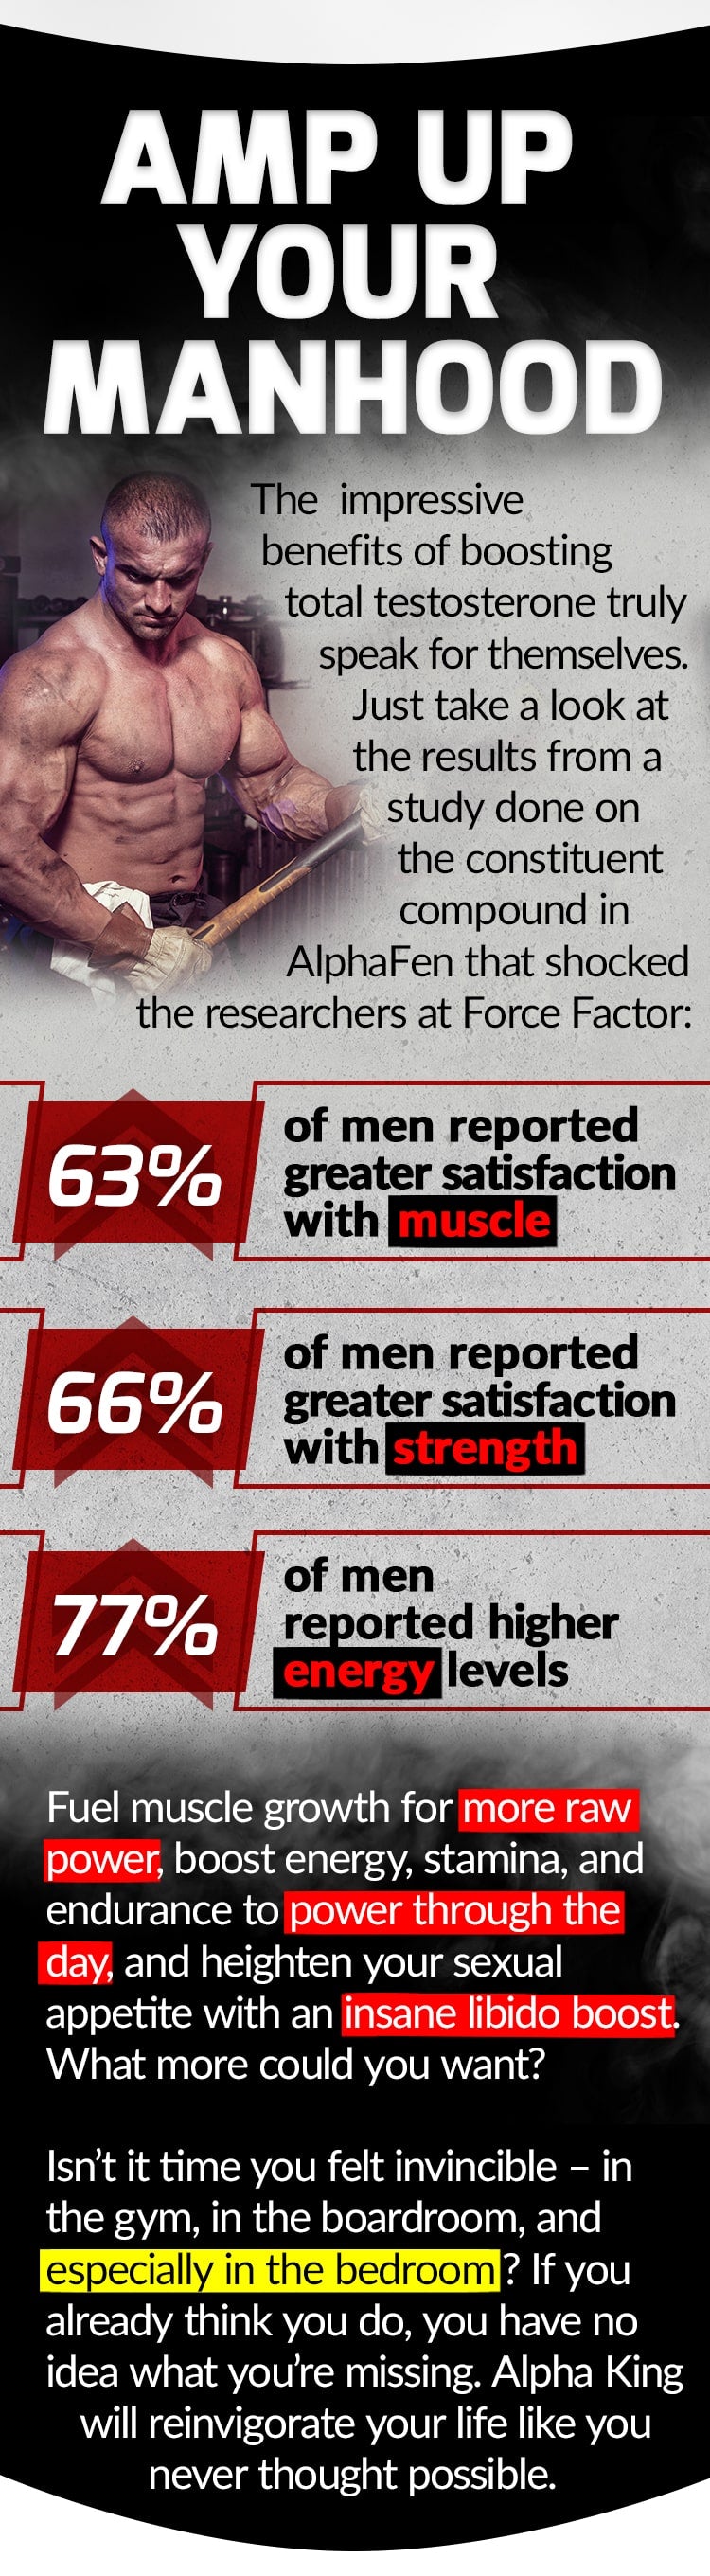 AMP UP YOUR MANHOOD. The impressive benefits of boosting total testosterone speak for themselves. Just take a look at the results from a study done on the constituent compound in AlphaFen that shocked the researchers at Force Factor: 63% of men reported greater satisfaction with muscle, 66% of men reported greater satisfaction with strength, 77% of men reported higher energy levels. Fuel muscle growth for more raw power, boost energy, stamina, and endurance to power through the day, and heighten your sexual appetite with an insane libido boost, What more could you want? Isn’t it time you felt invincible – in the gym, in the boardroom, and especially in the bedroom? If you already think you do, you have no idea what you’re missing. Alpha King will reinvigorate your life like you never thought possible.